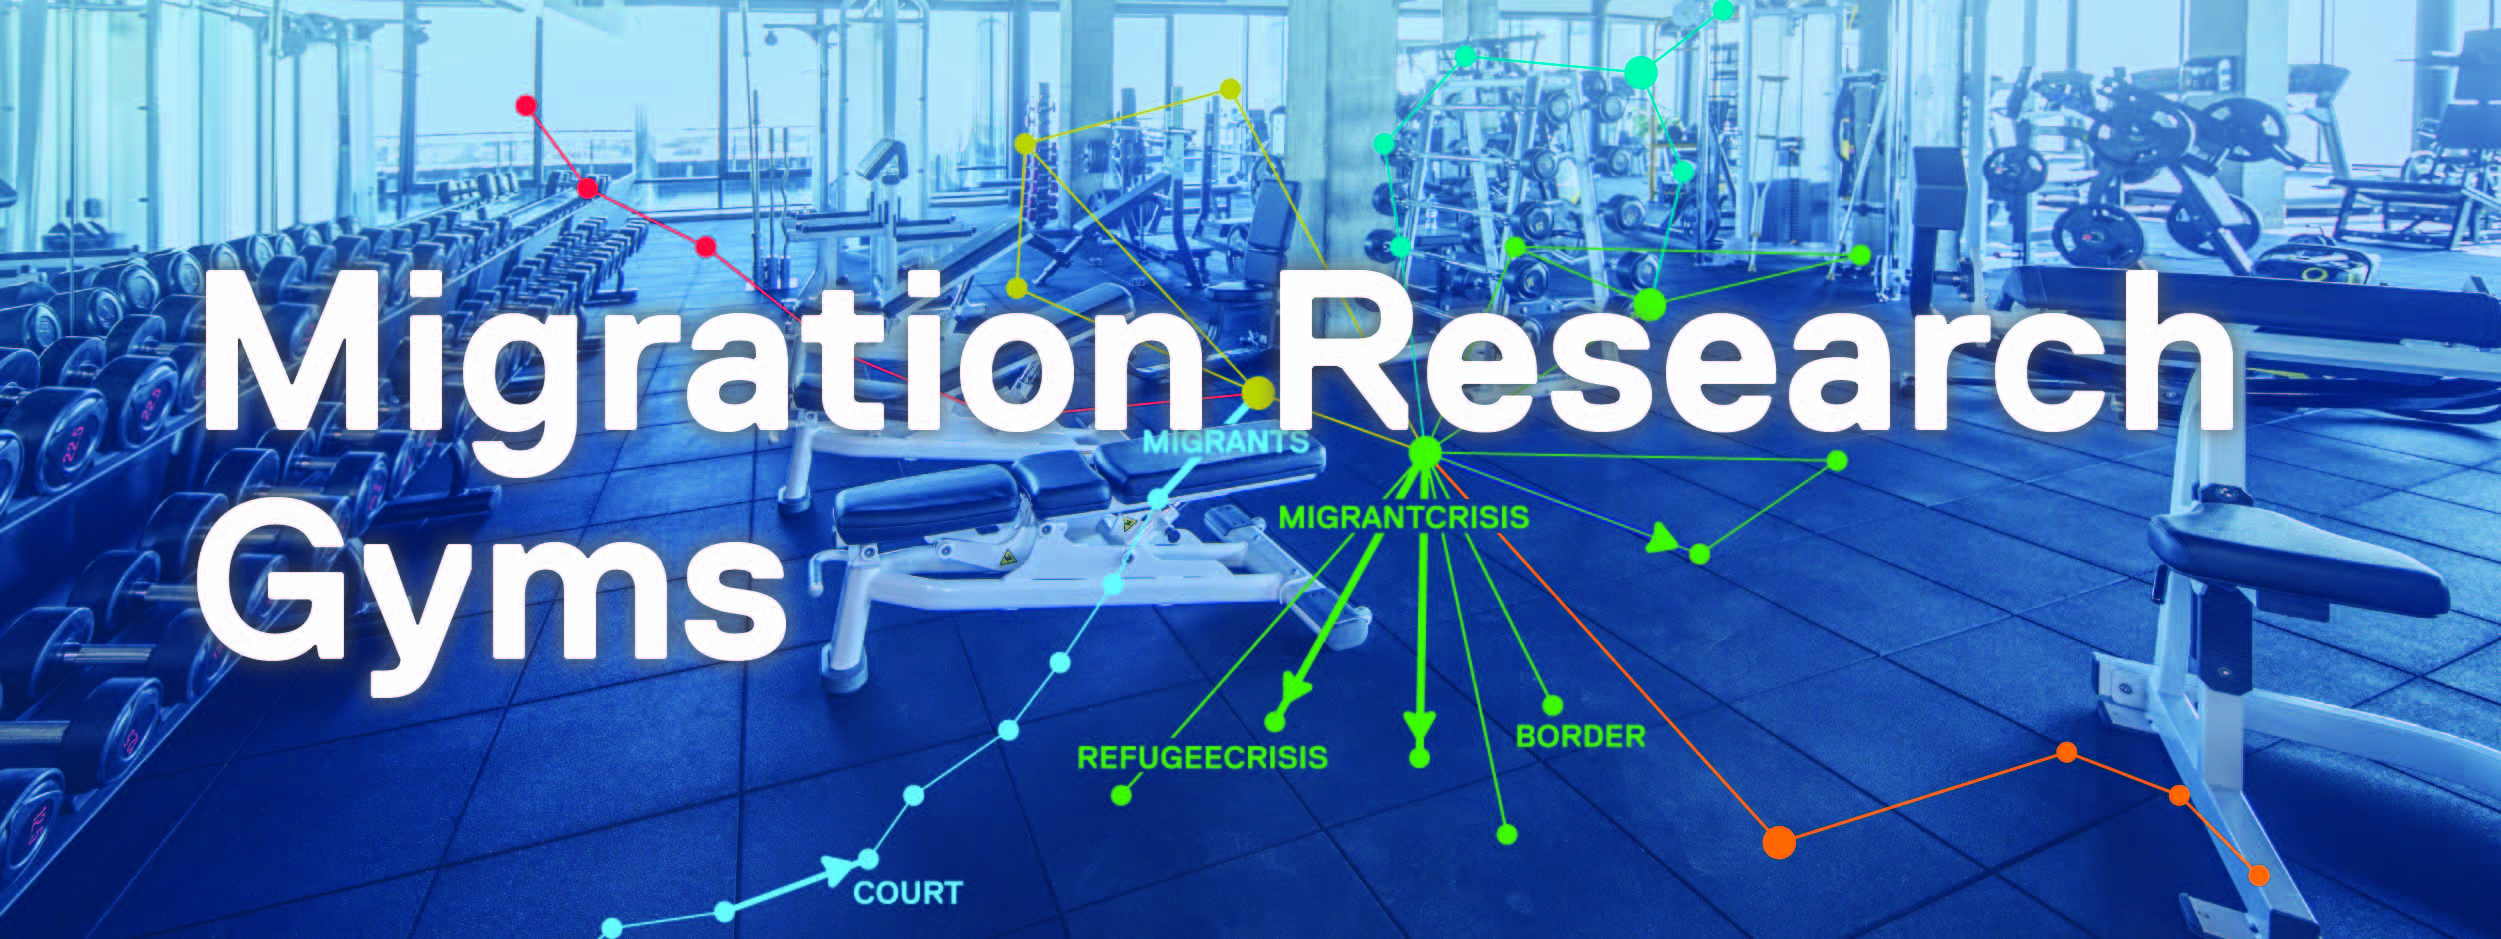 Migration ResearchGyms